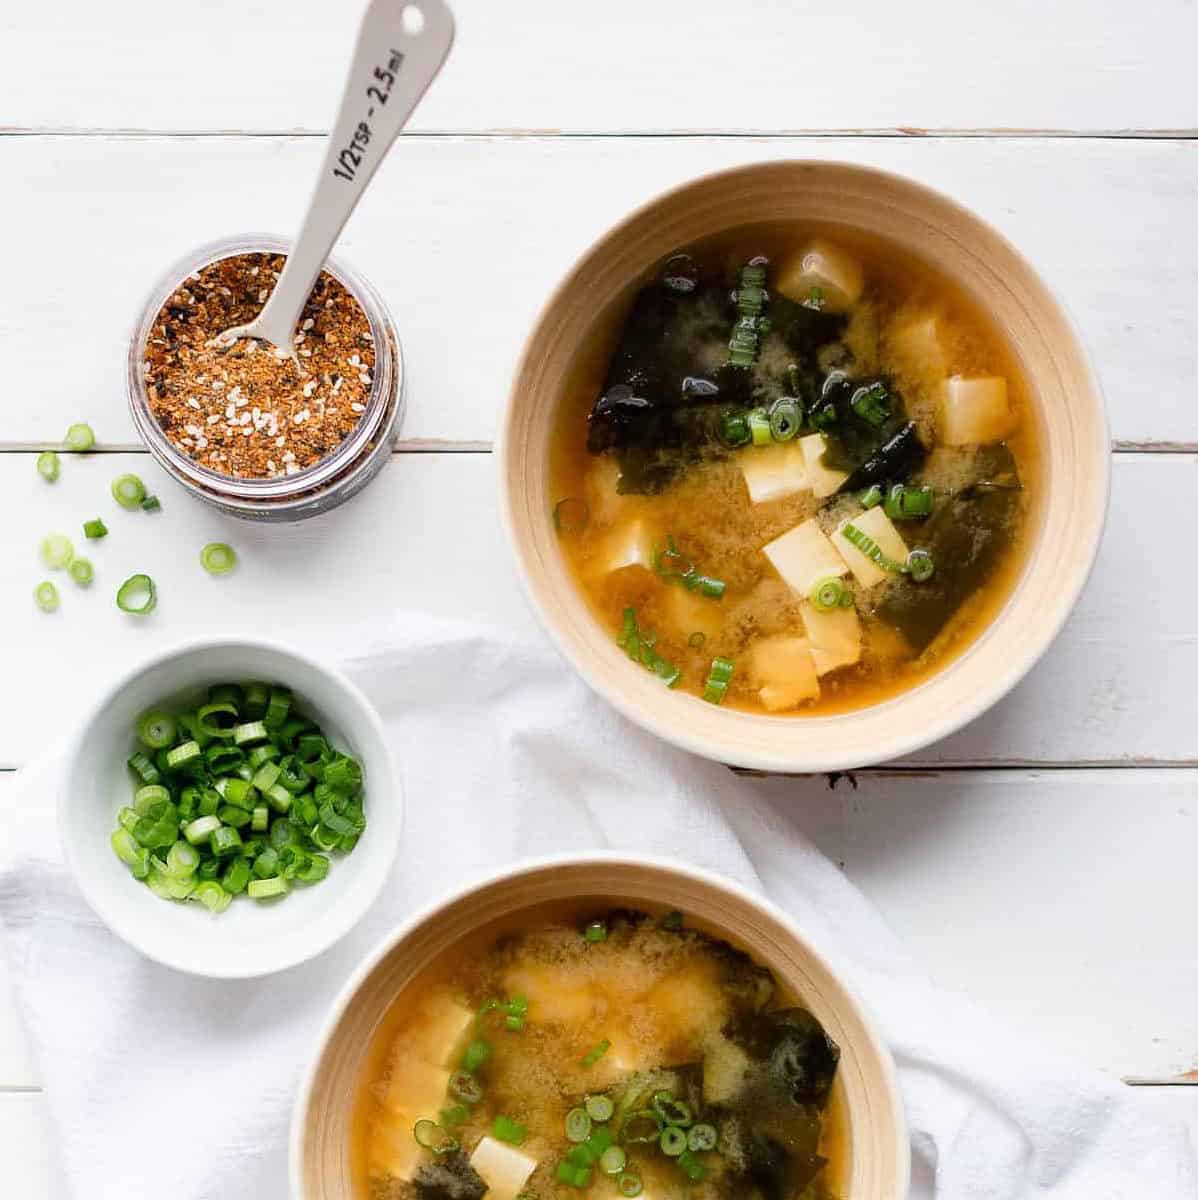  Every spoonful of this miso soup packs a punch, thanks to the addition of umami miso.